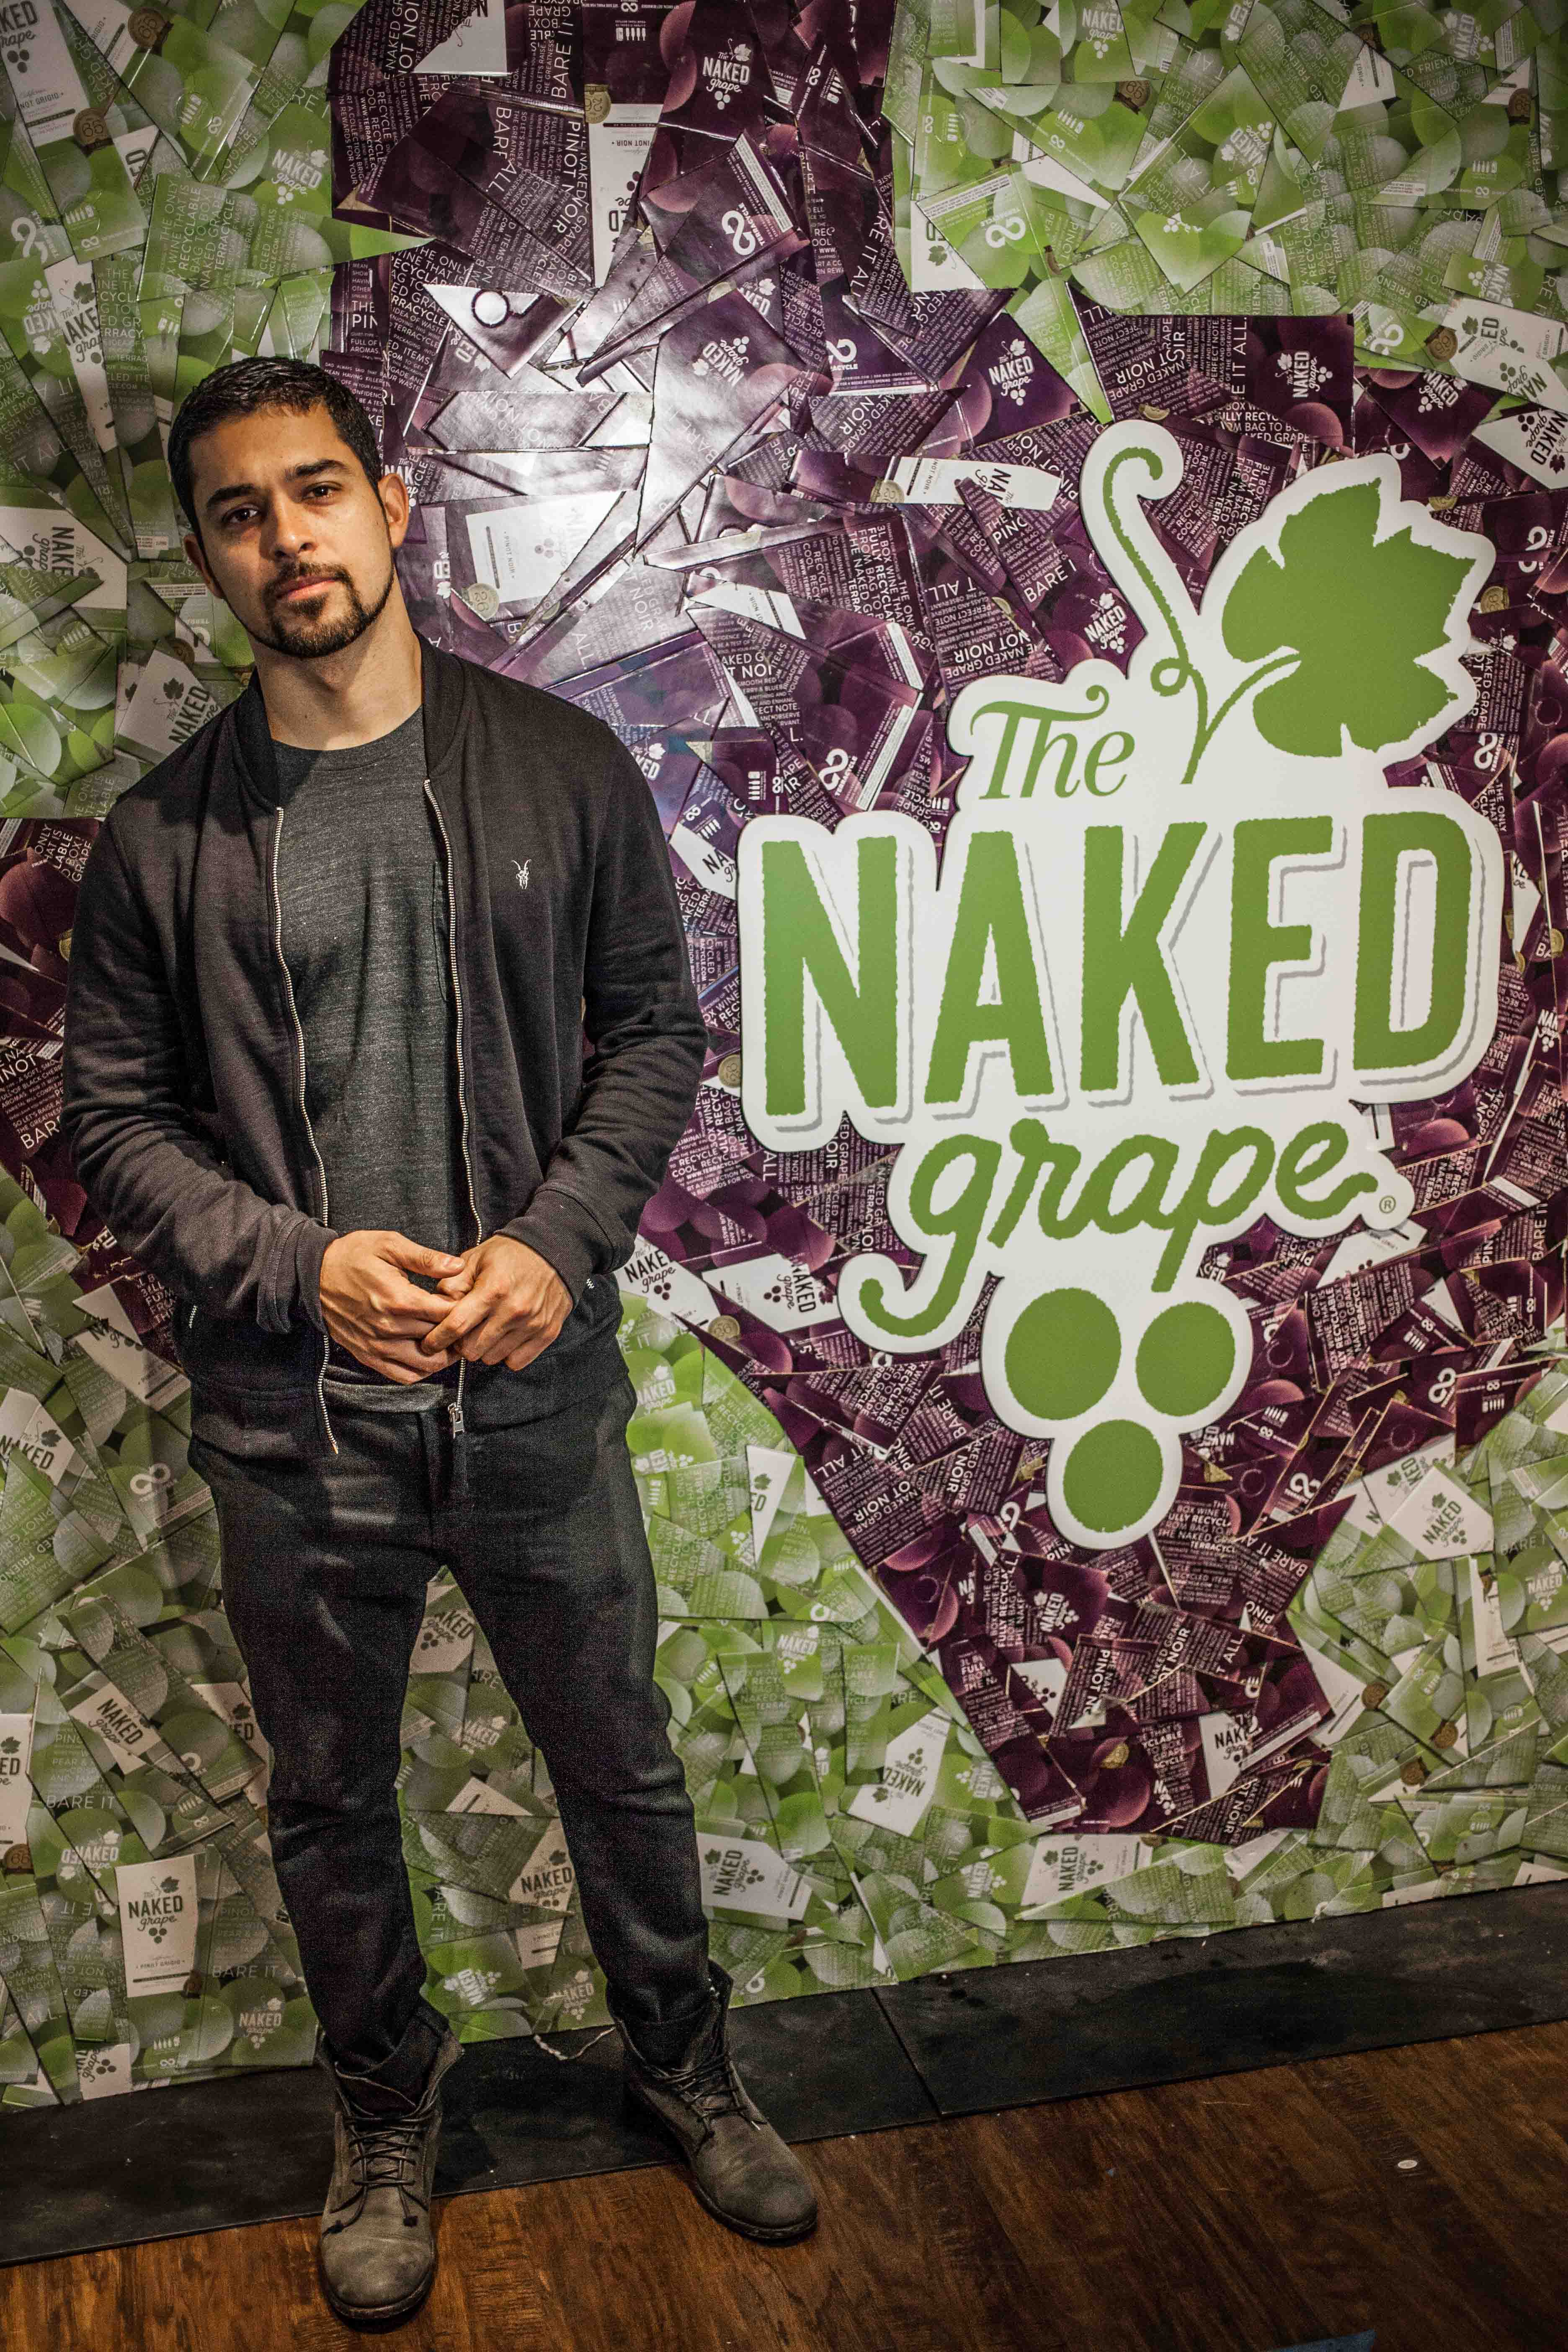 Wilmer Valderrama taking in live performances at The Naked Grape Music Box during SXSW in Austin, TX. Photo Credit: Lance Skundrich of Filterless Co.